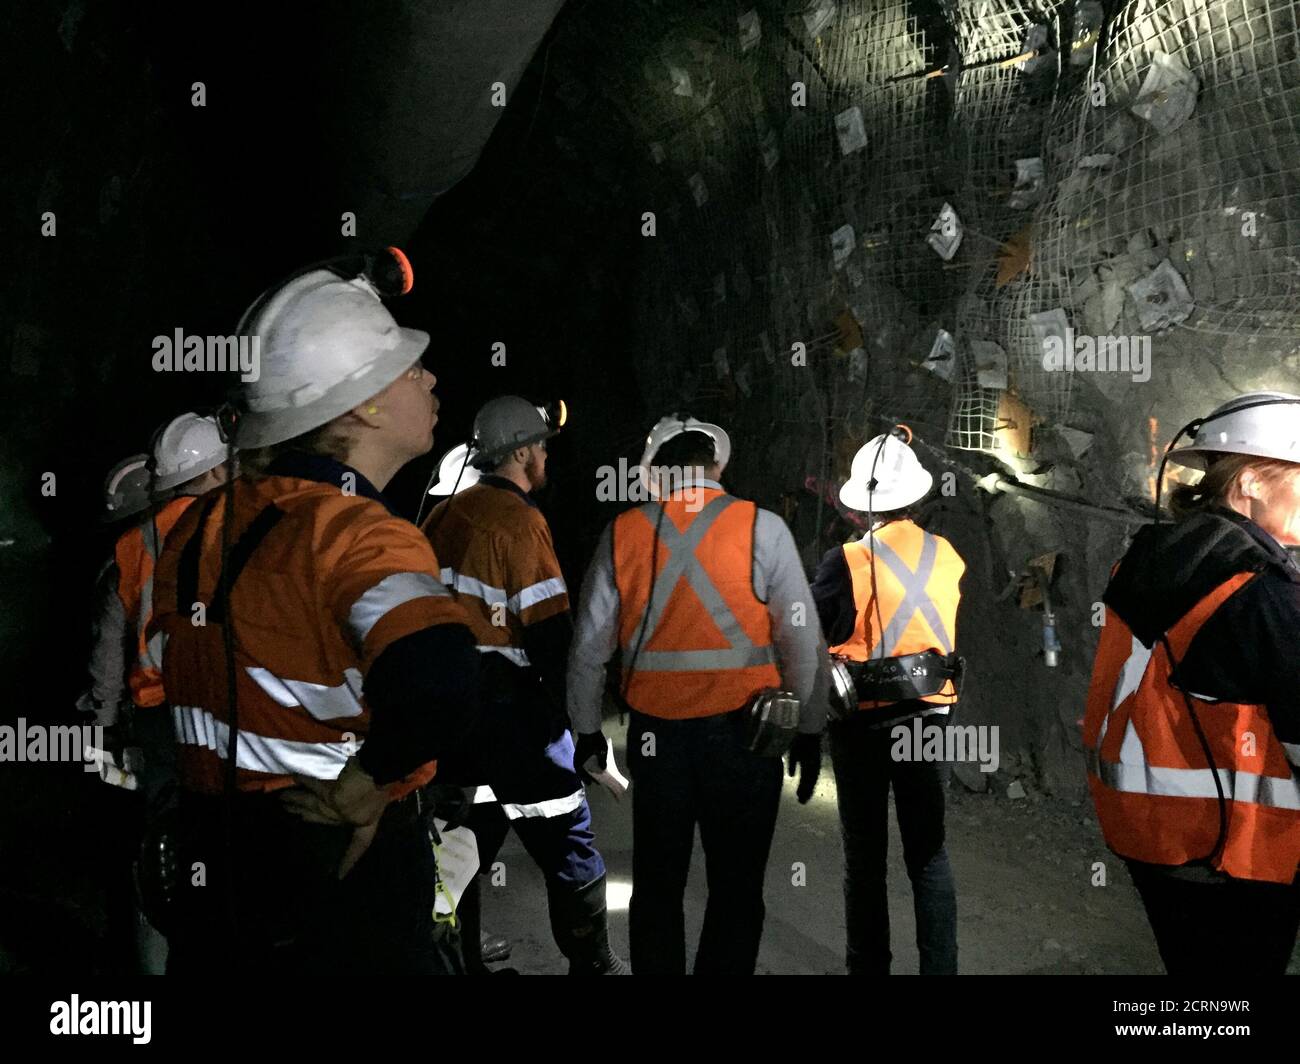 Mining analysts inspect a high grade nickel copper deposit at Independence Group's Nova mine in Australia August 4, 2018. Picture taken August 4, 2018. REUTERS/Melanie Burton Photo - Alamy